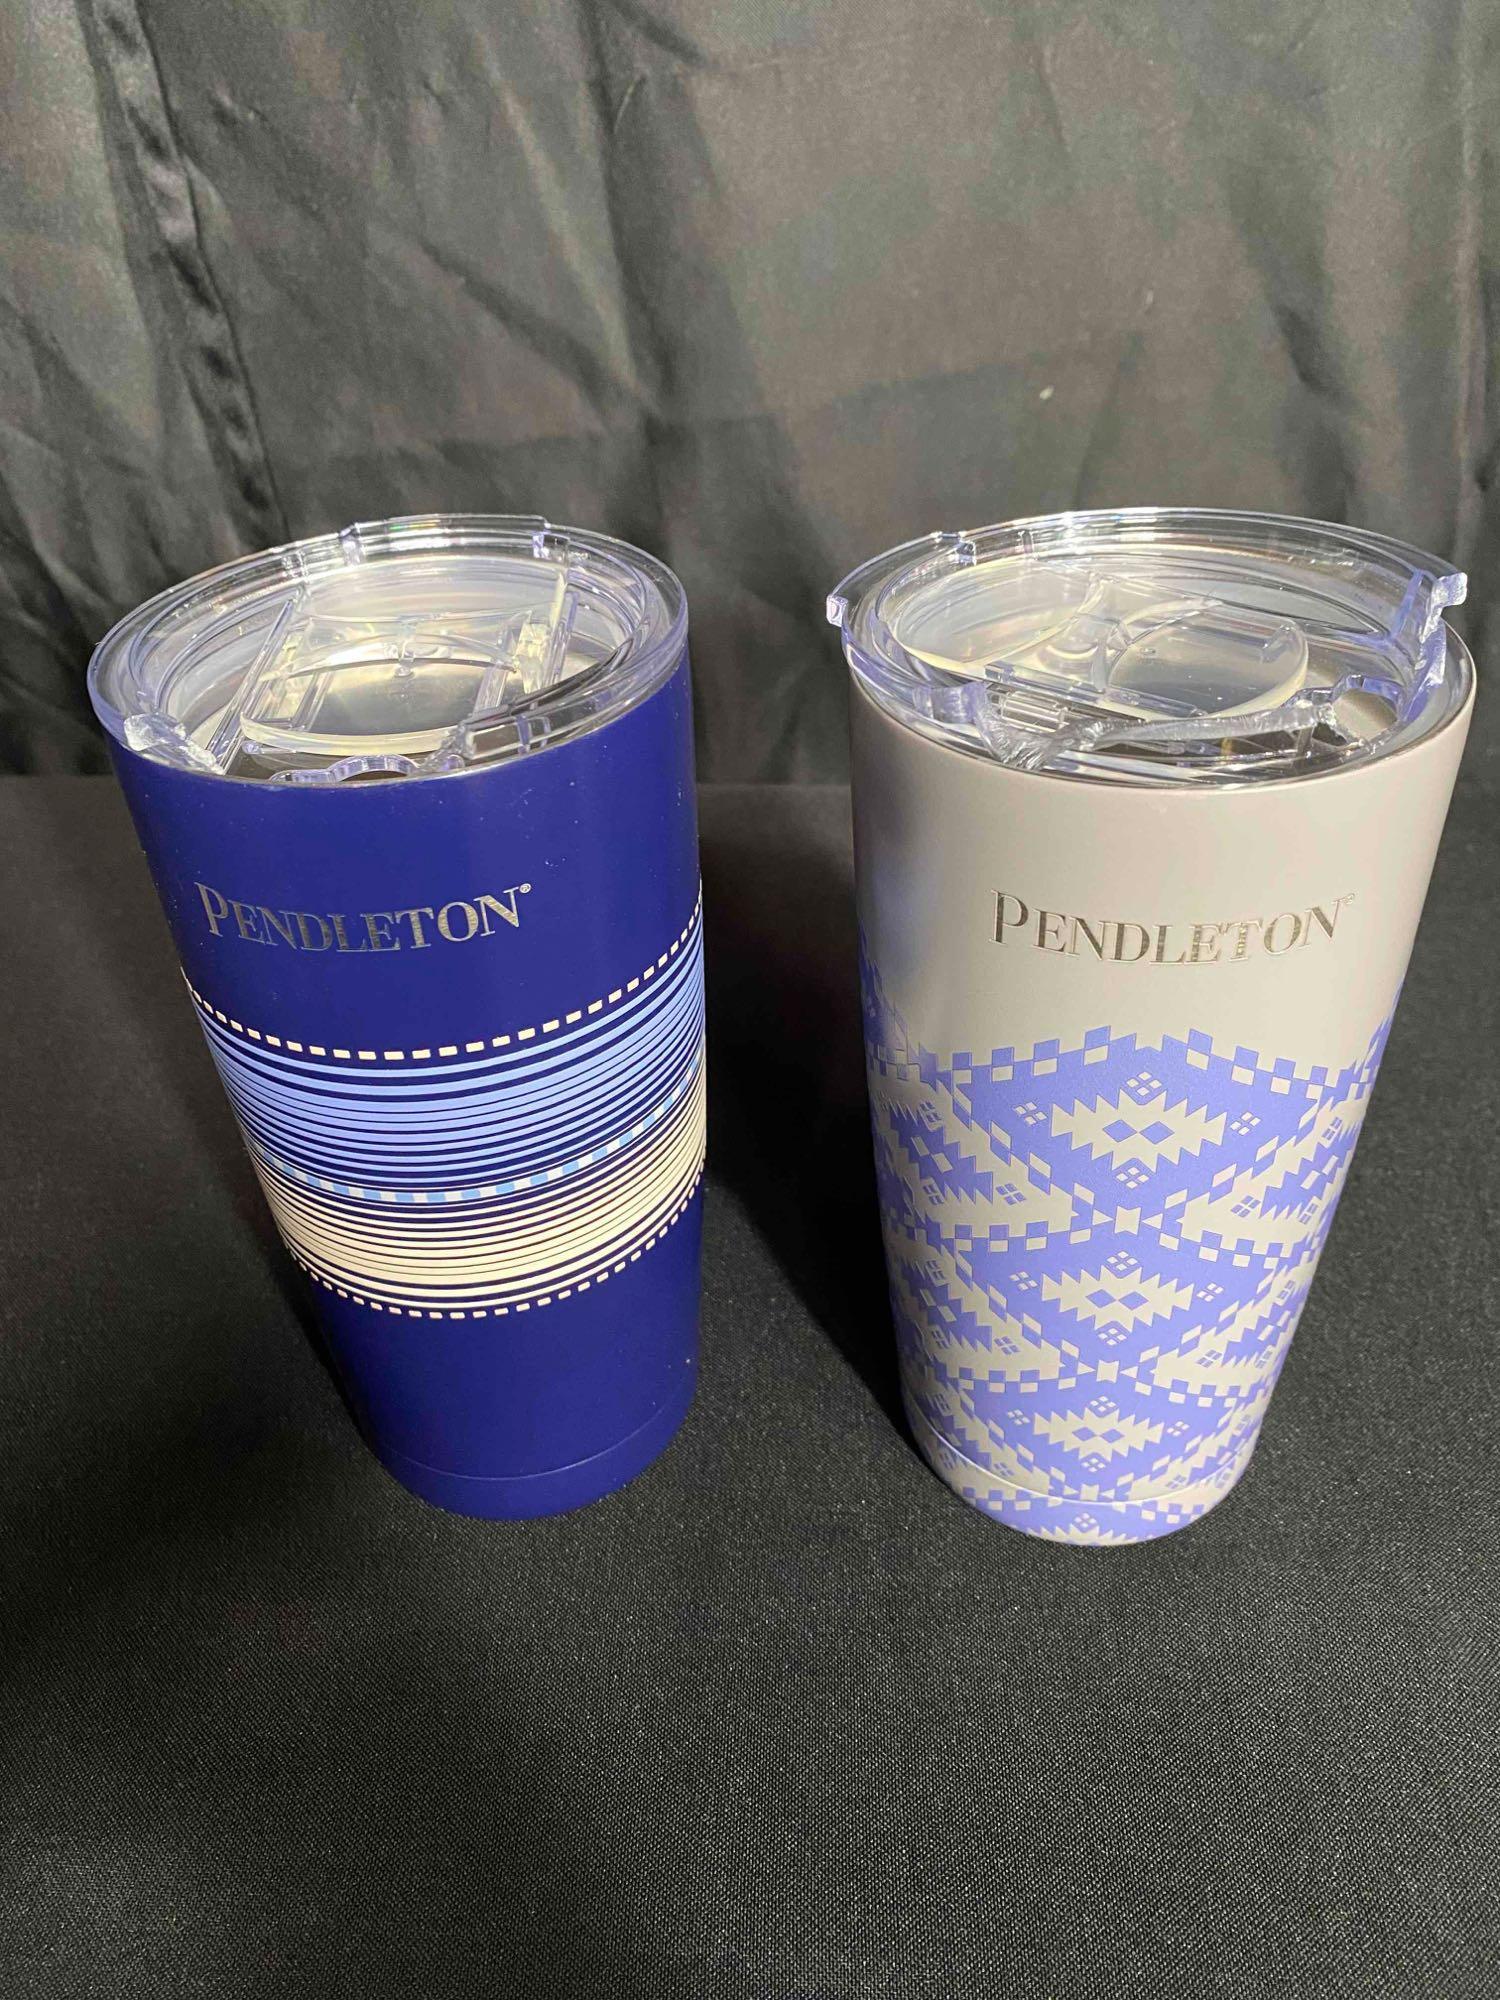 Pendleton 20oz Stainless Steel Hot/Cold Tumblers Cups - Set of  2: Tumblers & Water Glasses